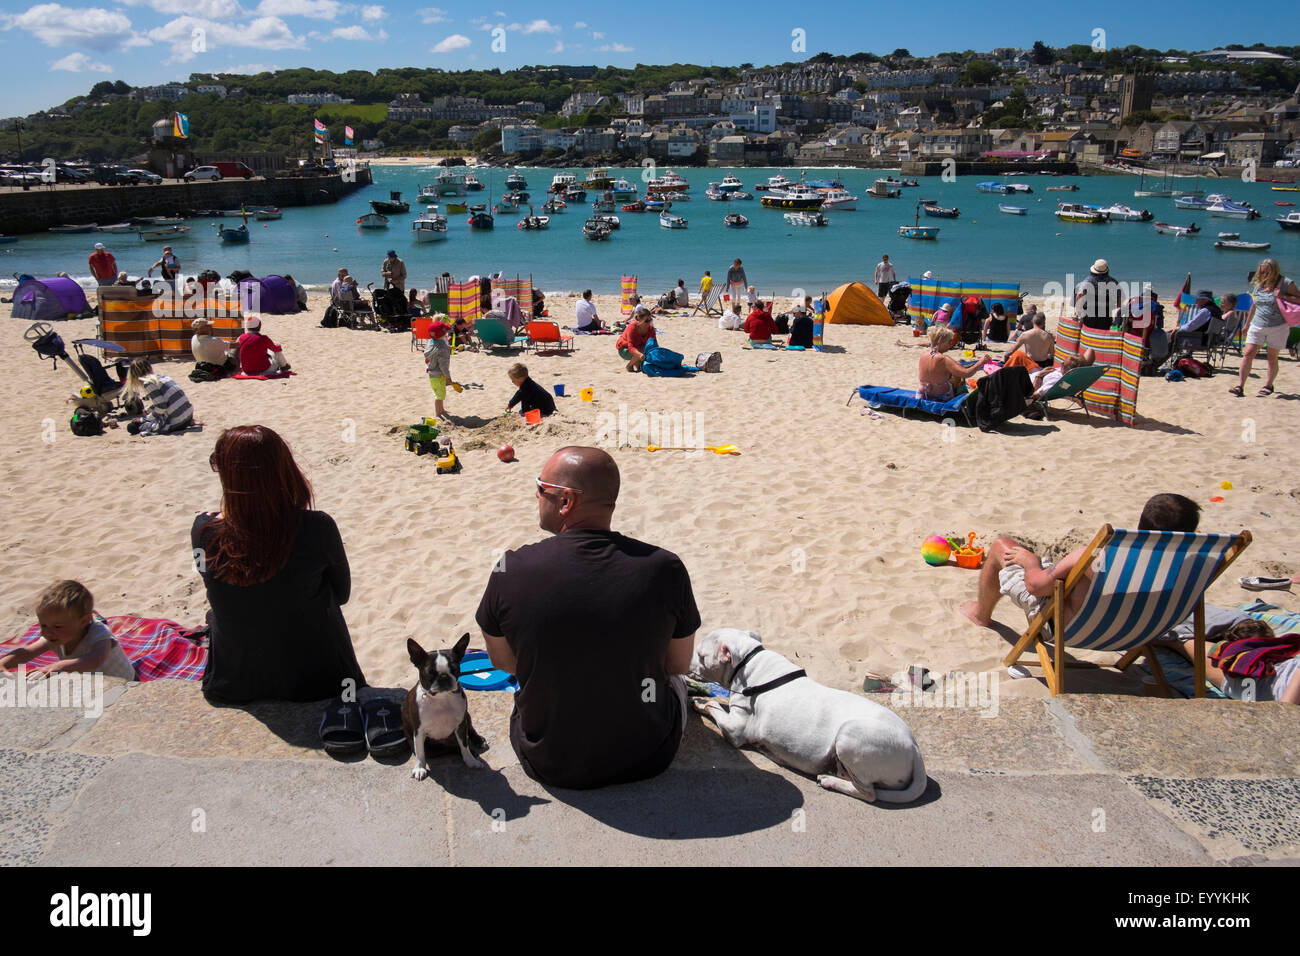 People sunbathing with dogs by the harbour at St Ives, Cornwall, England, UK Stock Photo